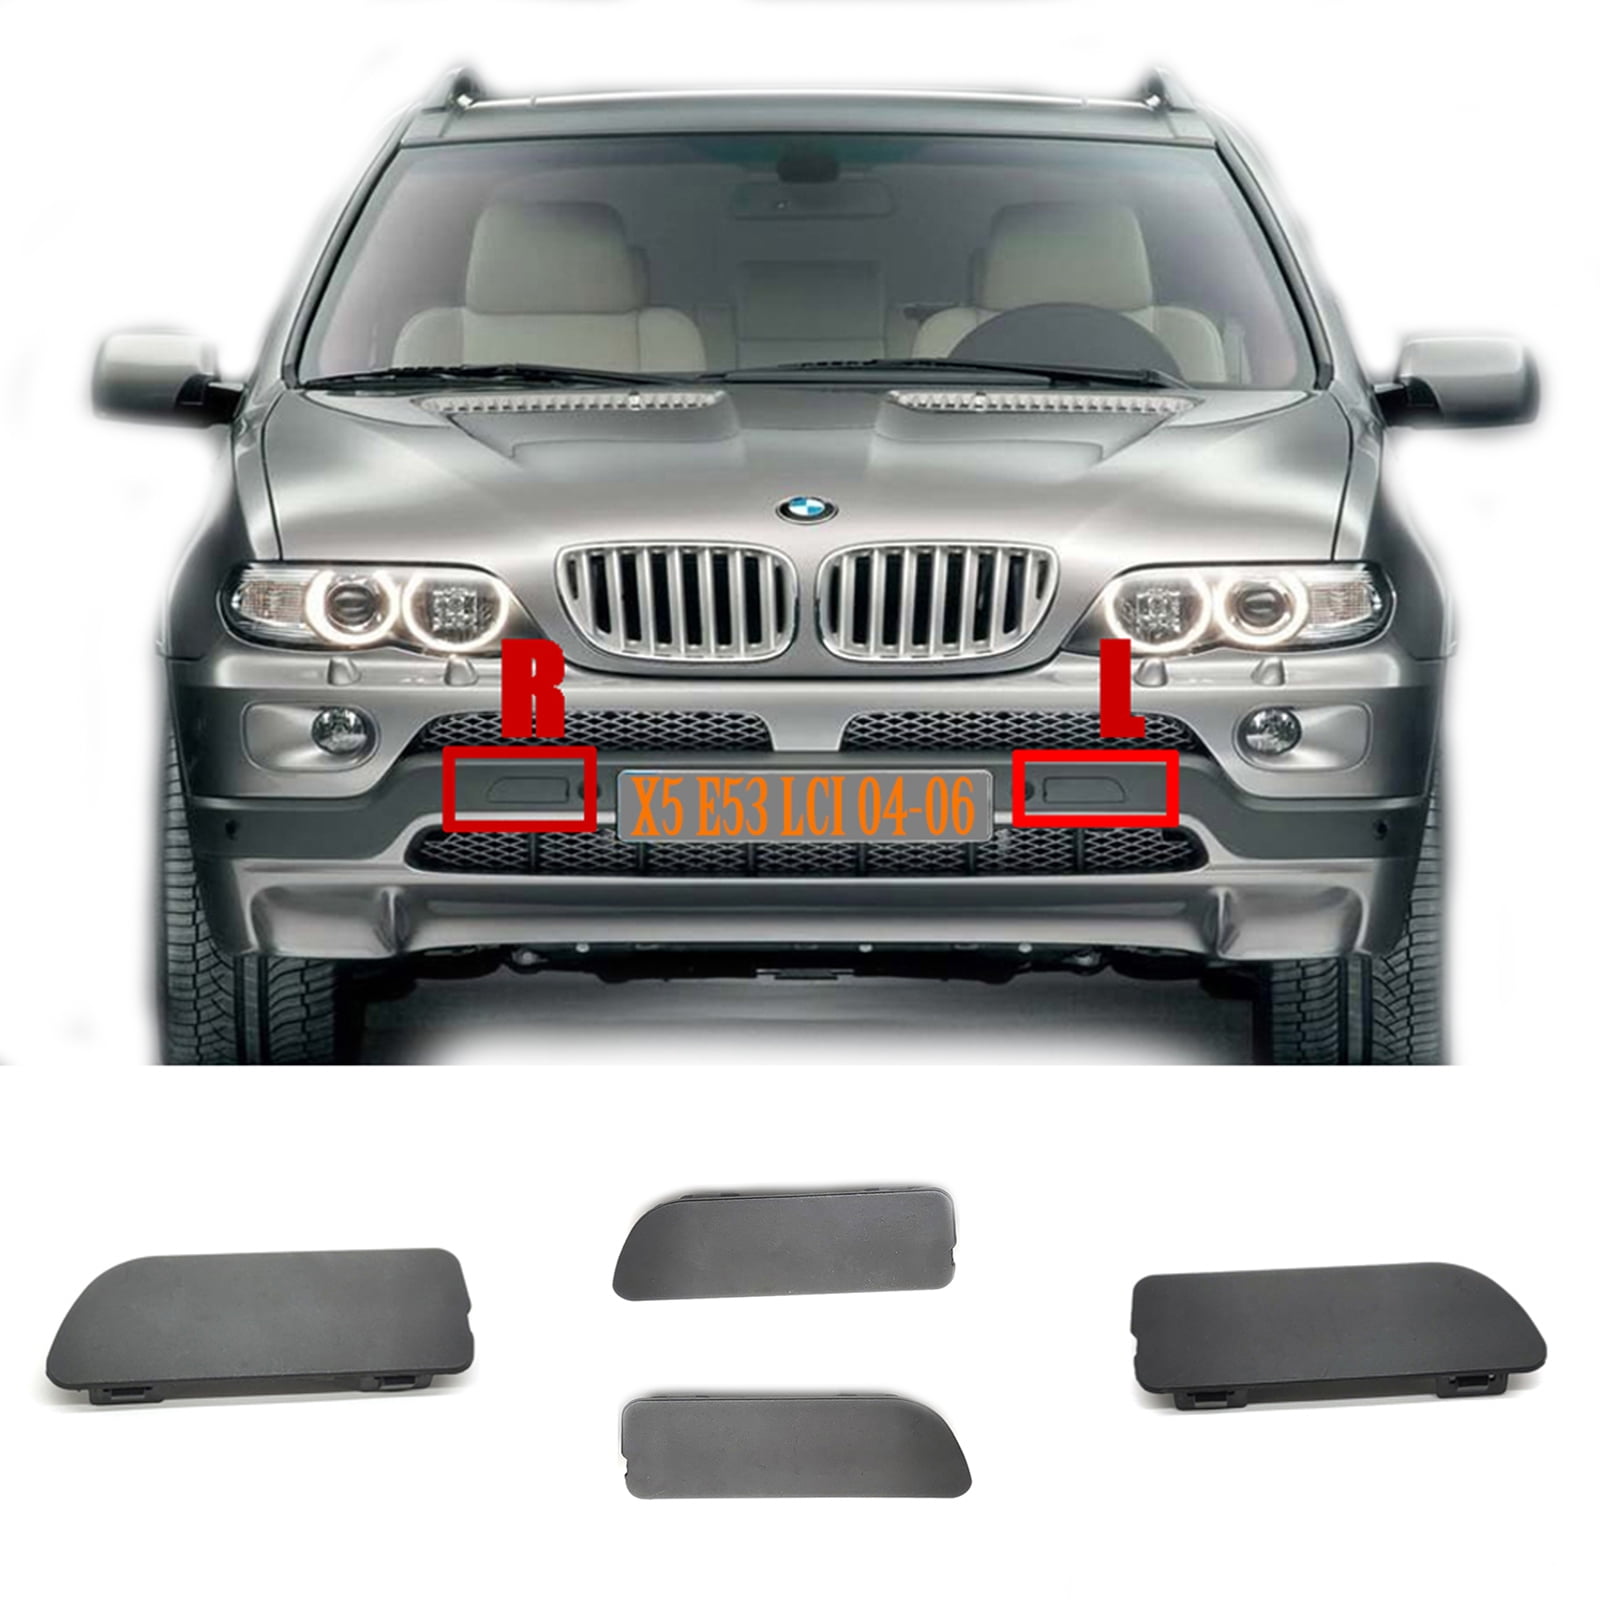 Trimla Front L+R Tow Cover for 04-06 BMW X5 series E53LCI Fit 3.0d 3.0i  4.4i 4.6is 4.8is xDrive sDrive 2004 2005 2006 SAV bumper Towing Hooke Eye  Cap 51117116671 51117116672 